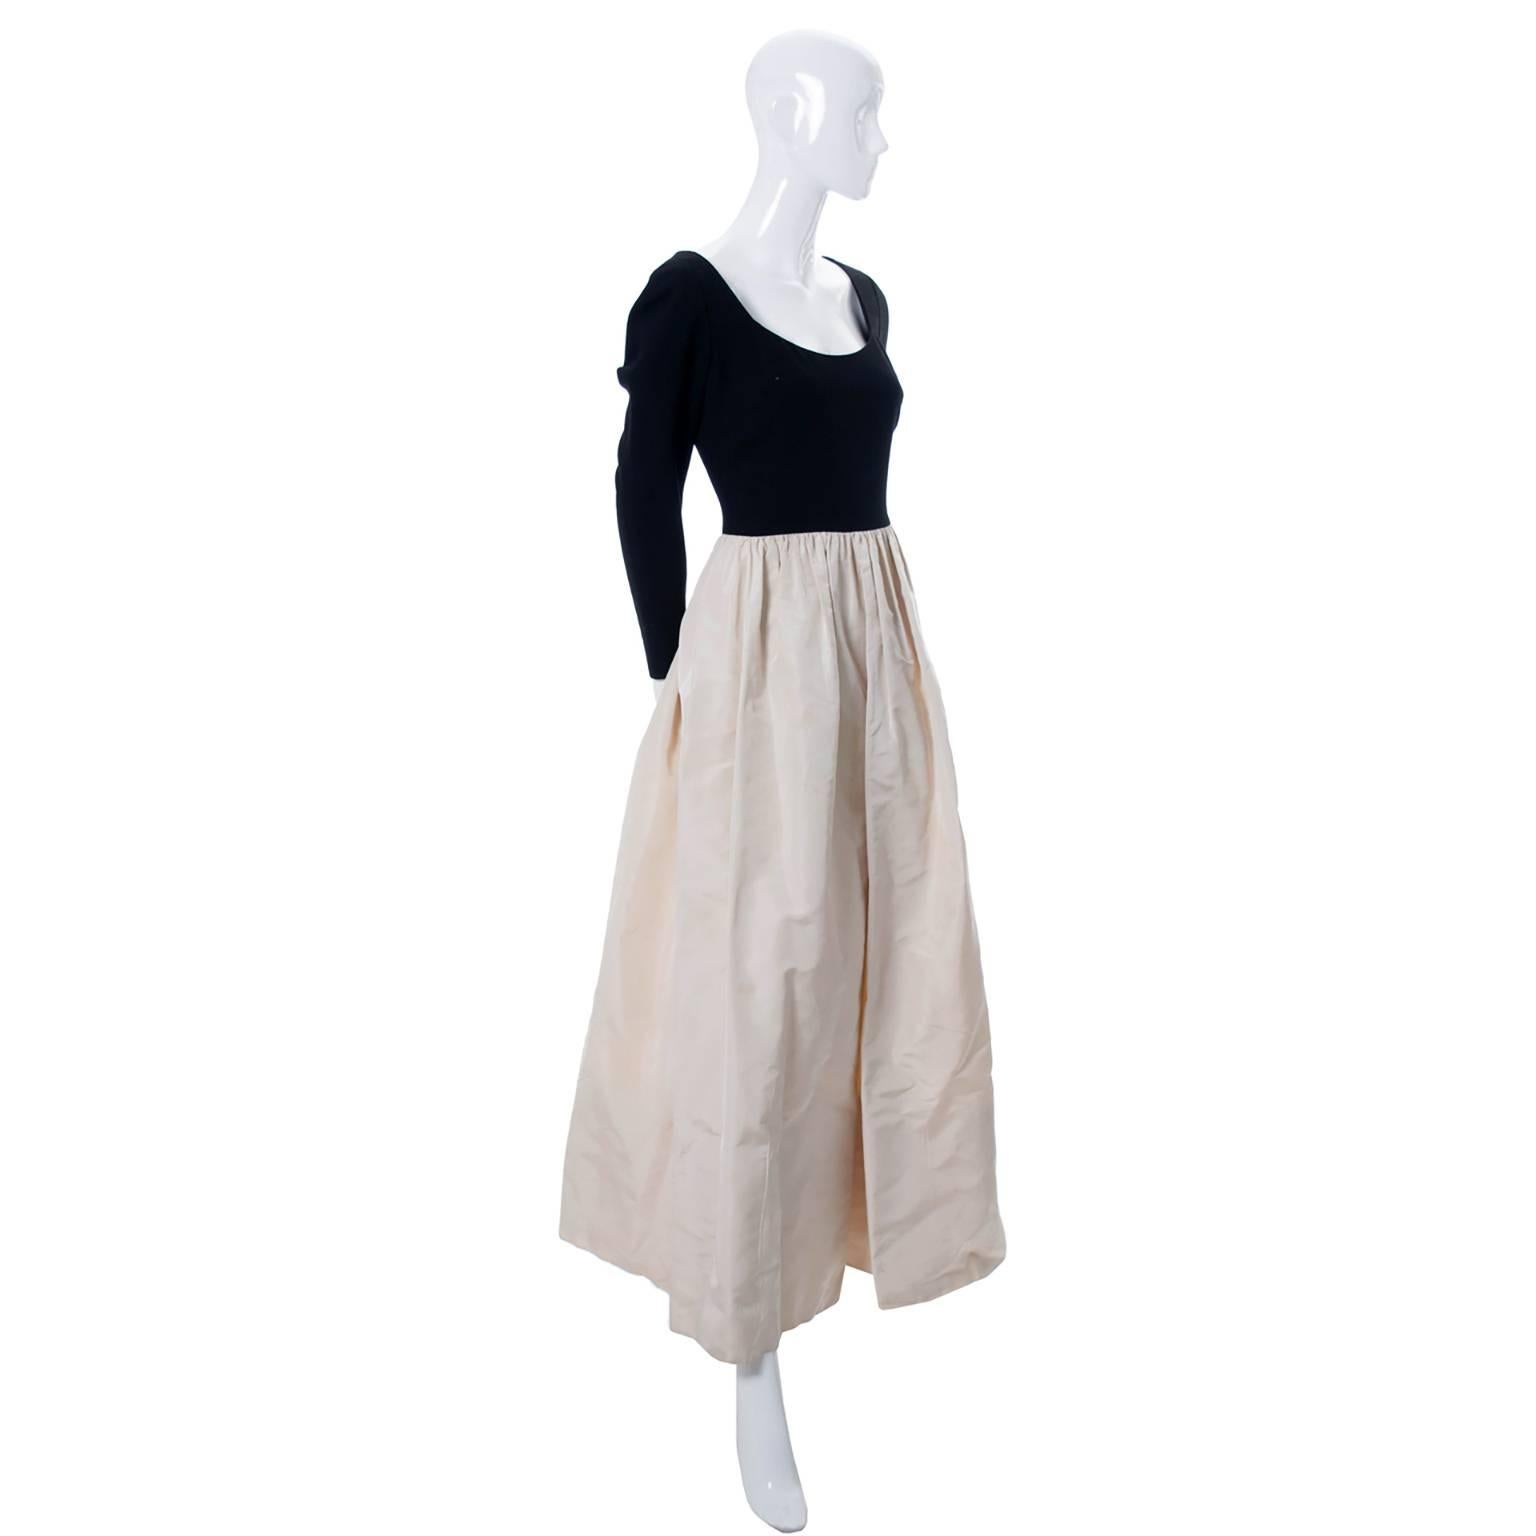 This is a really lovely vintage Pauline Trigere long dress from the late 1960's or early 1970s. The dress has a black wool crepe bodice and a silk satin skirt.  This dress is in excellent condition and has both the Pauline Trigere and Marshall Field